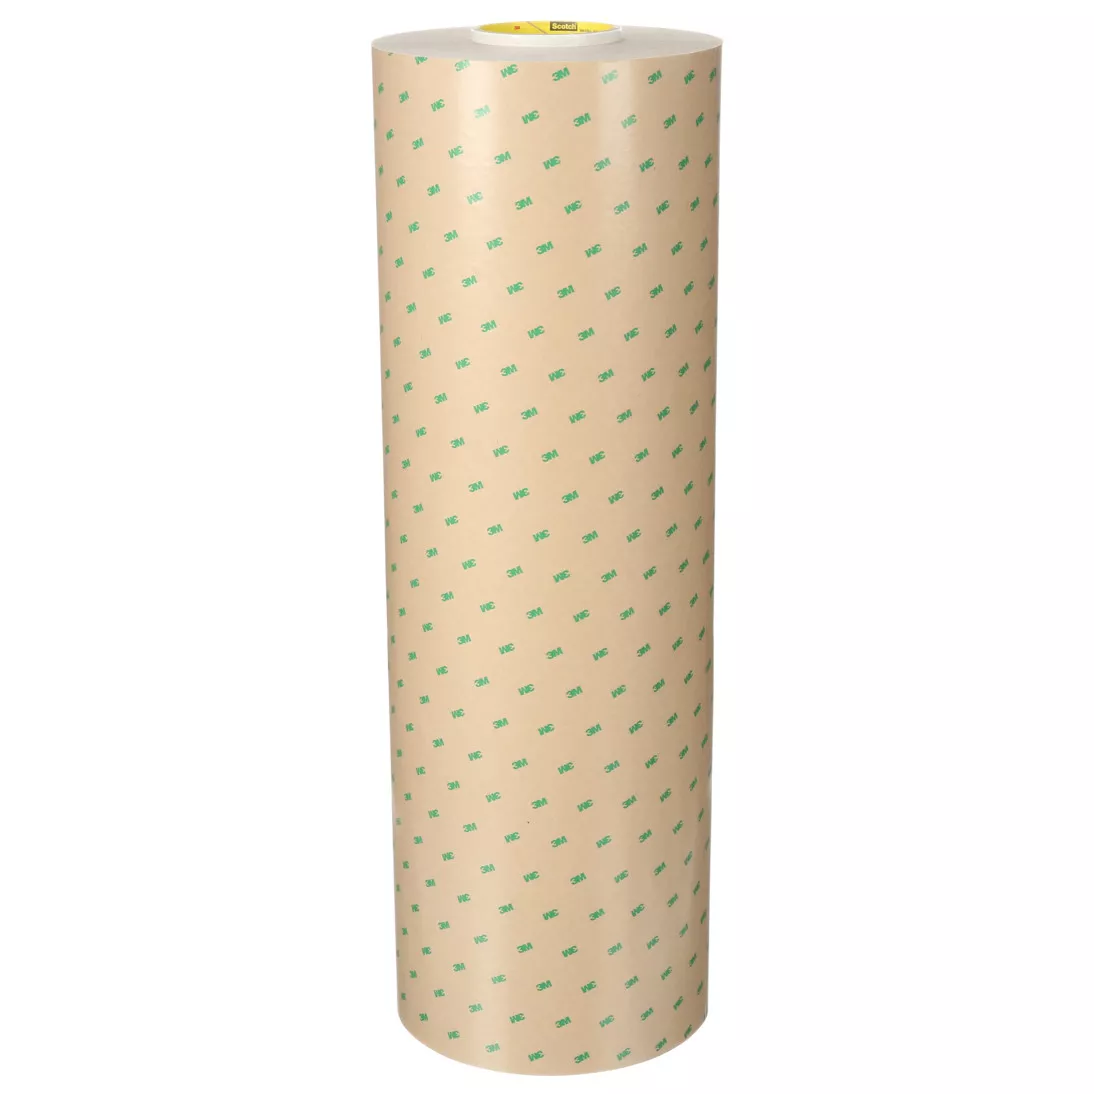 3M™ Adhesive Transfer Tape 9502, Clear, 48 in x 180 yd, 2 mil, 1 roll
per case